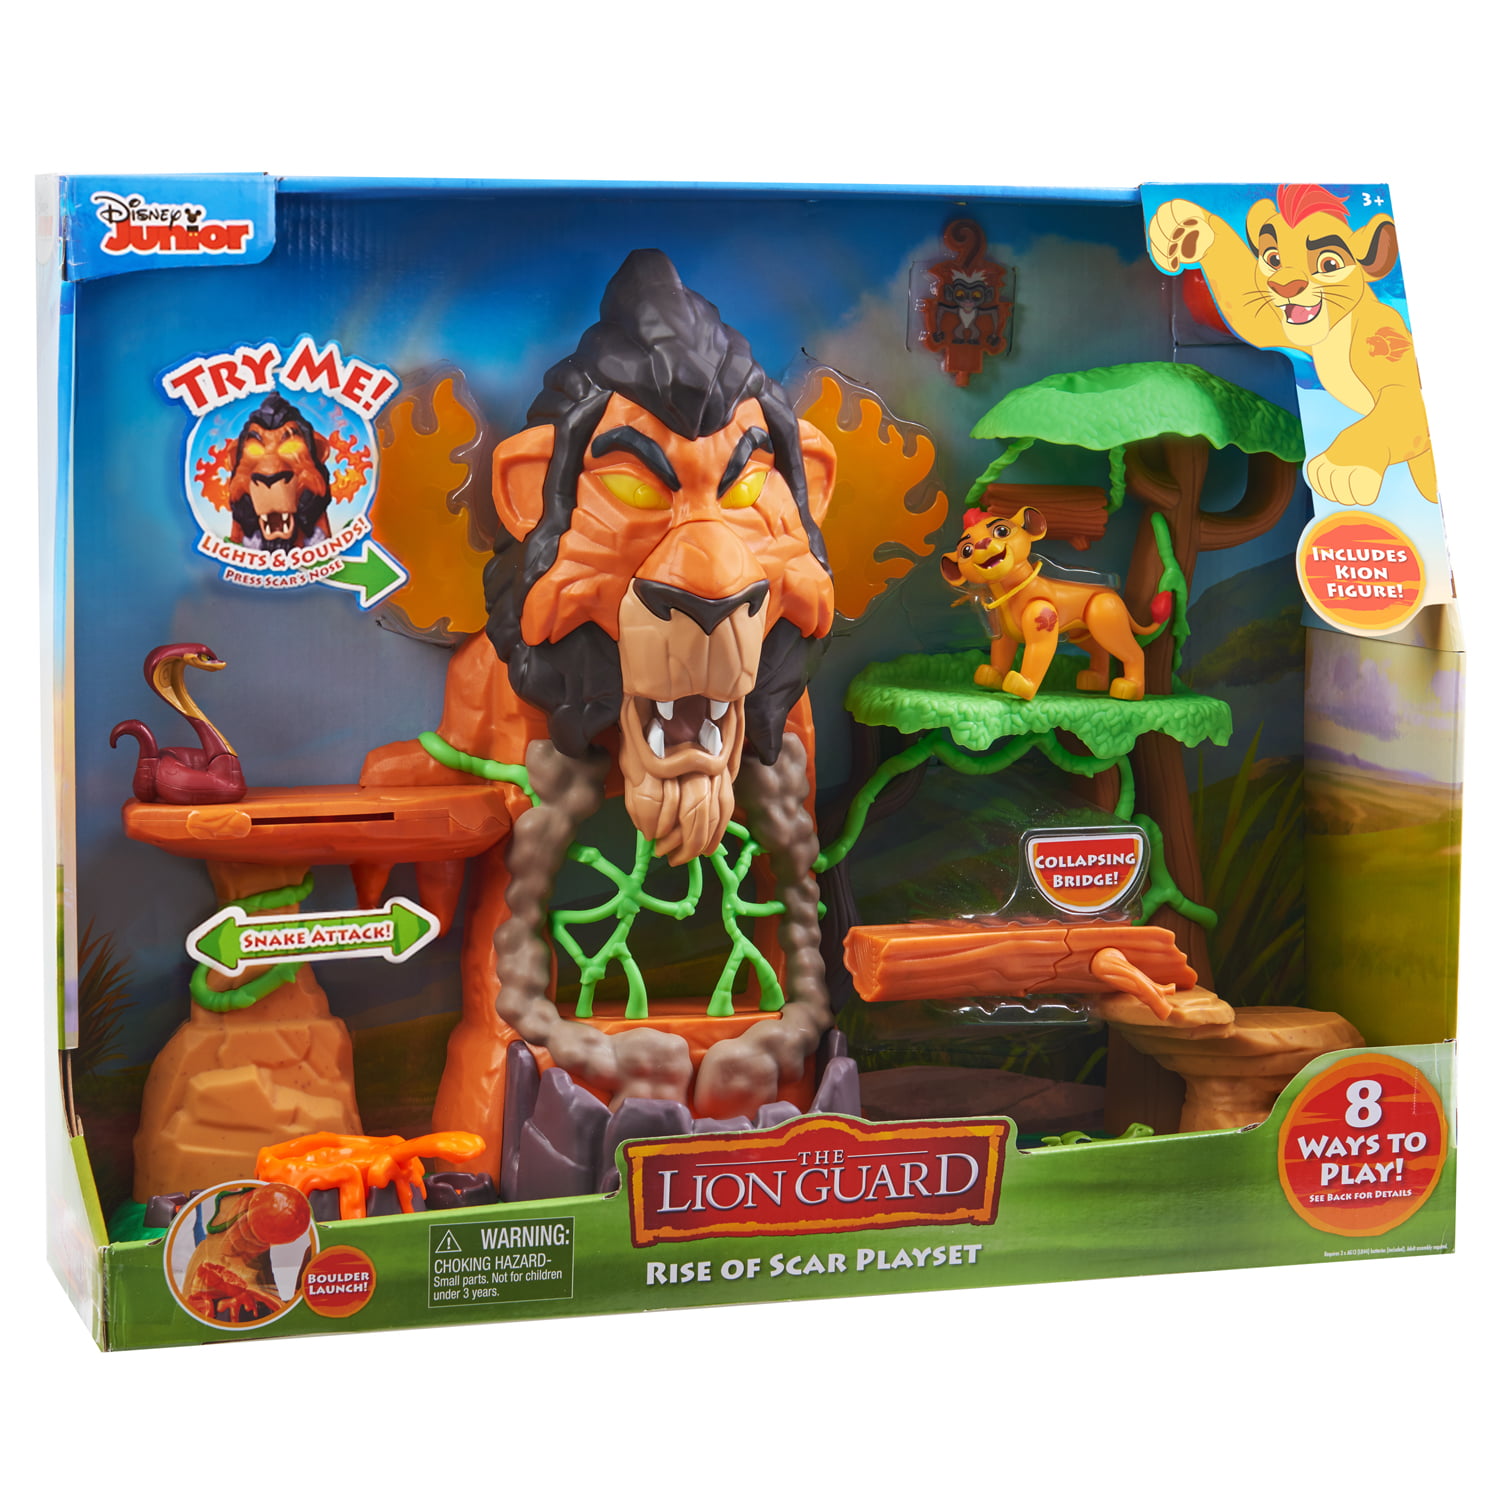 The Lion Guard Figurines